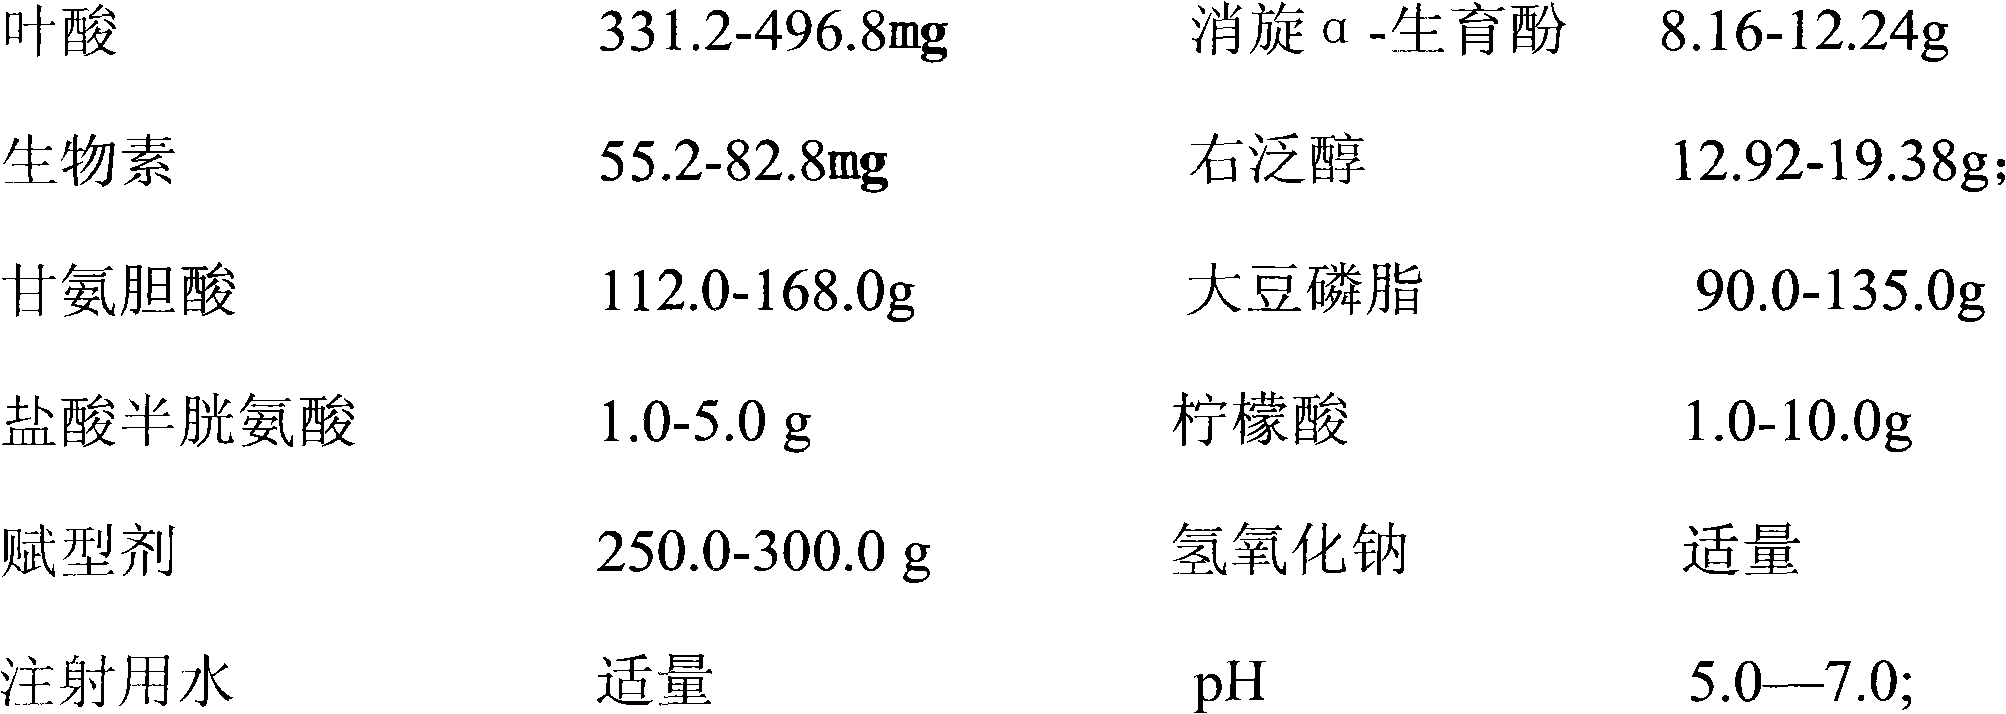 Pharmaceutical composition containing 12 vitamins